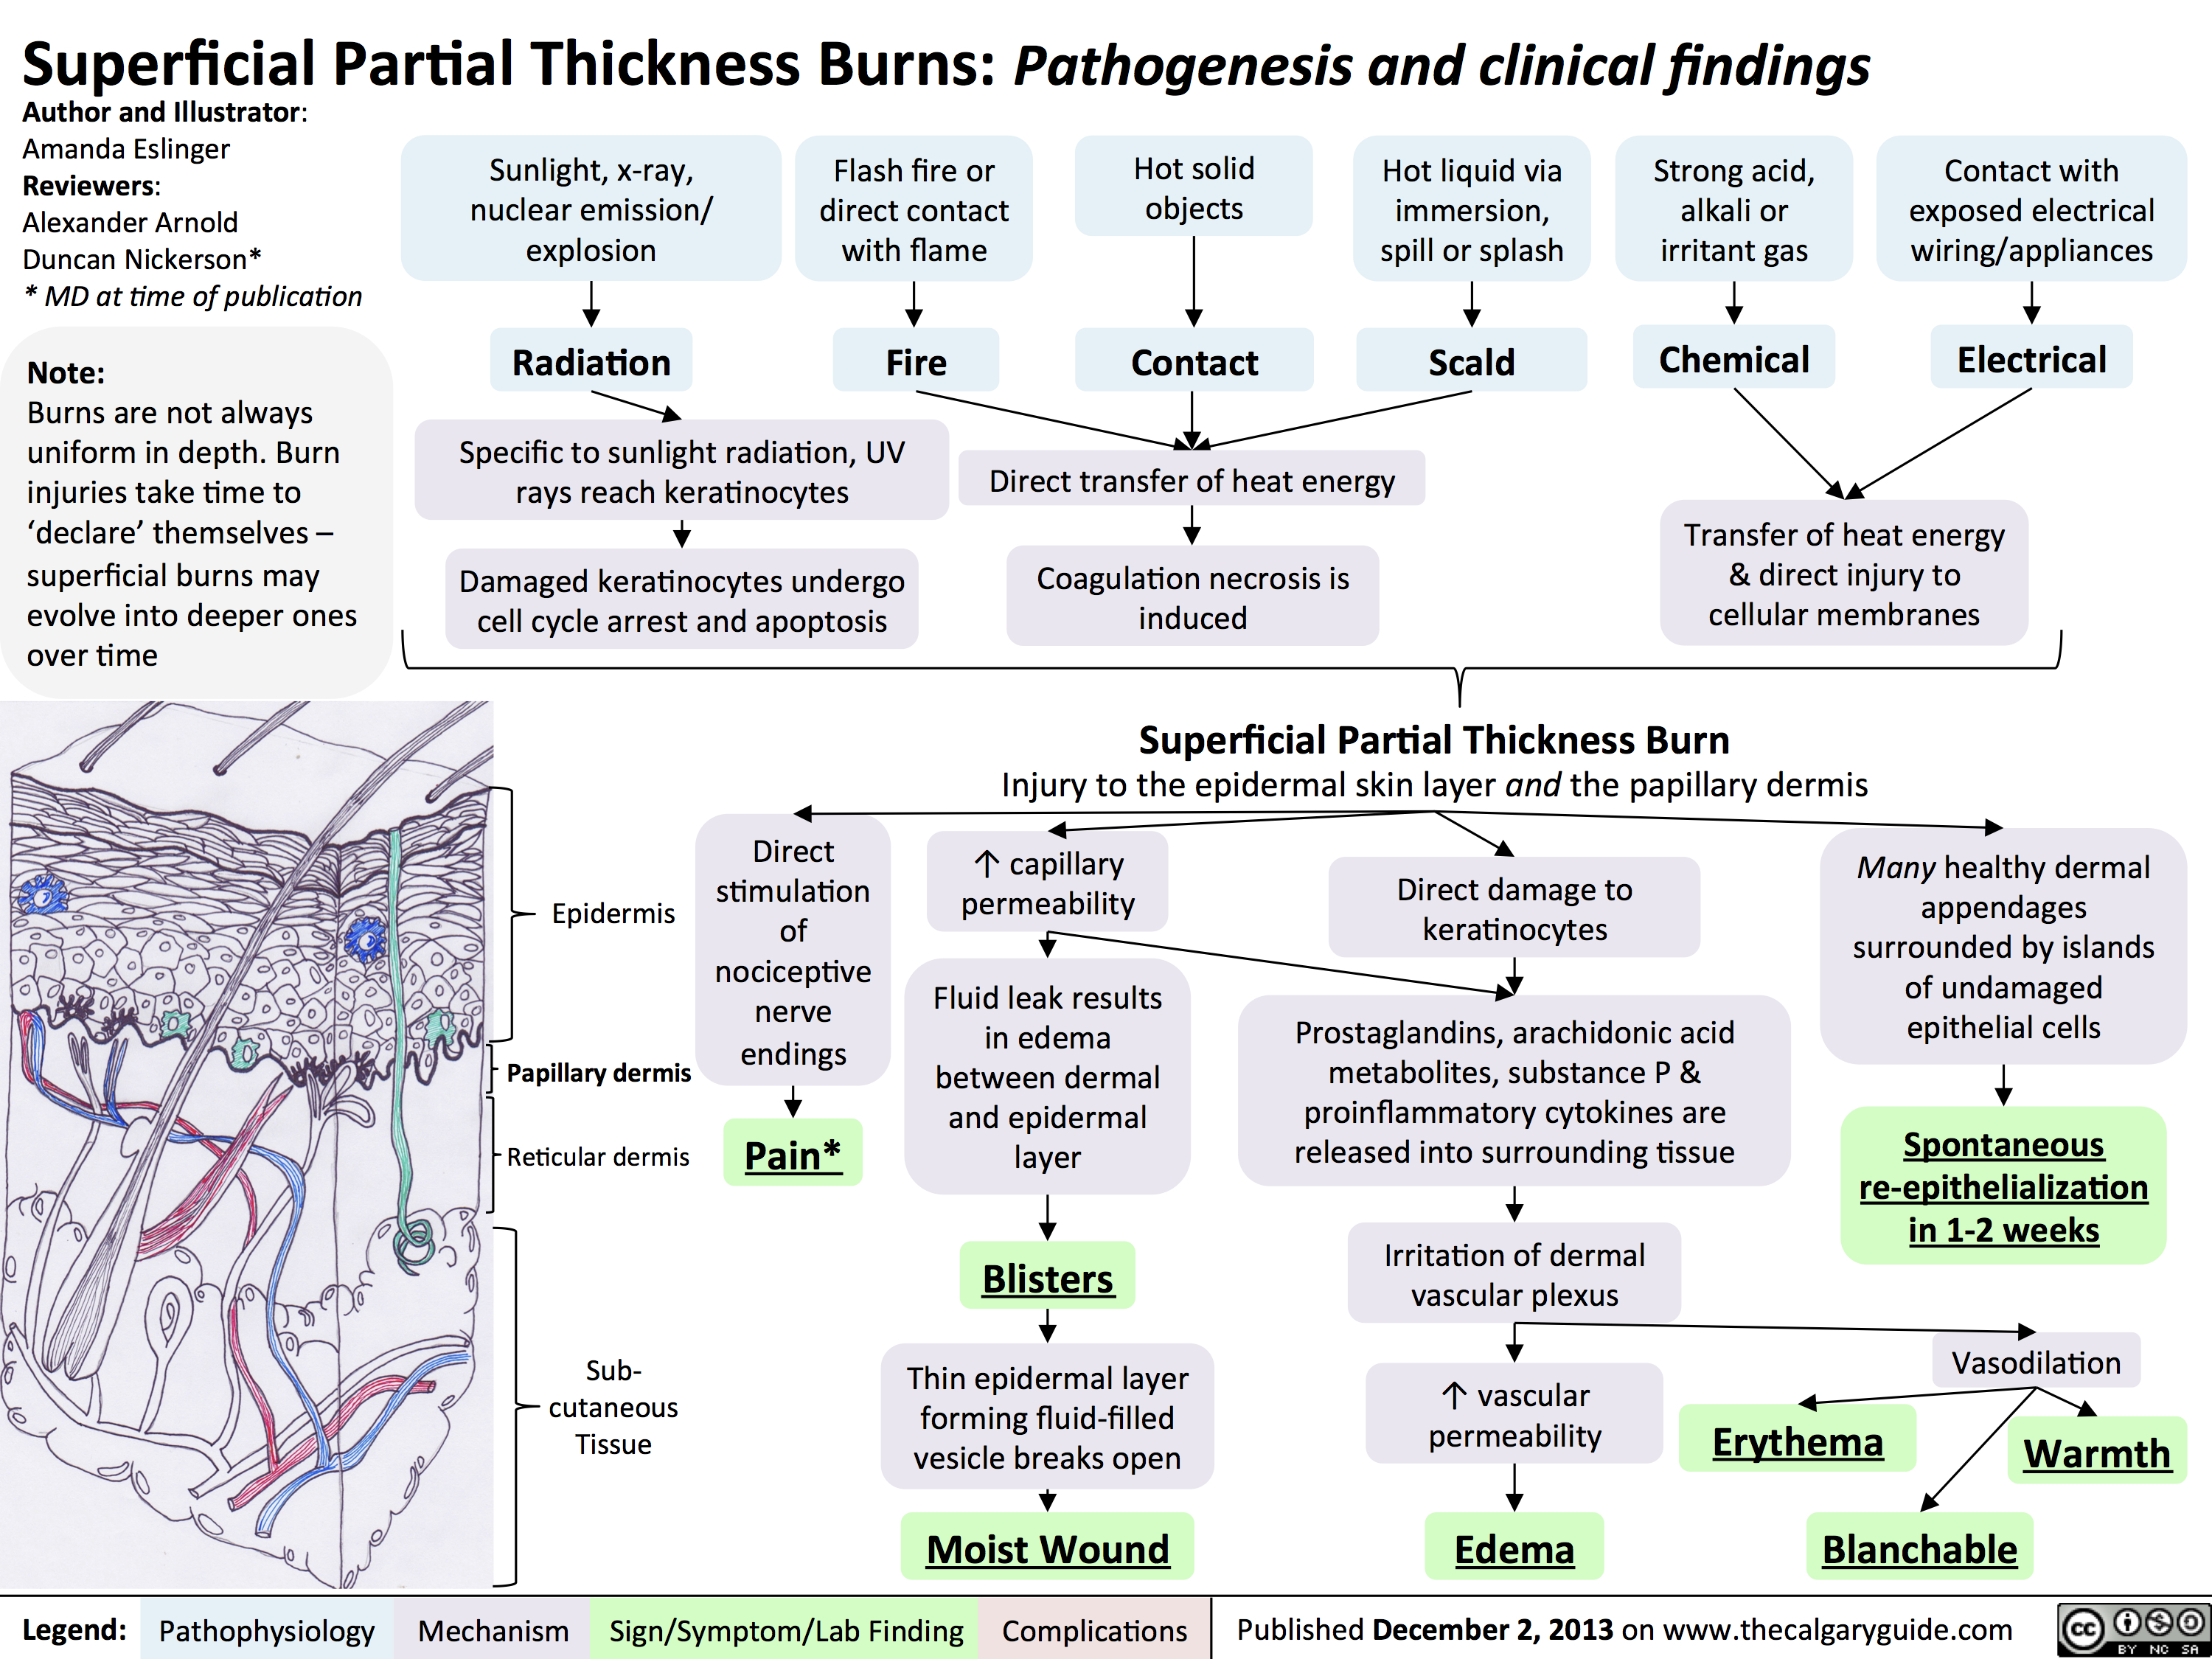 Superficial Partial Thickness Burns - Pathogenesis and Clinical Findings